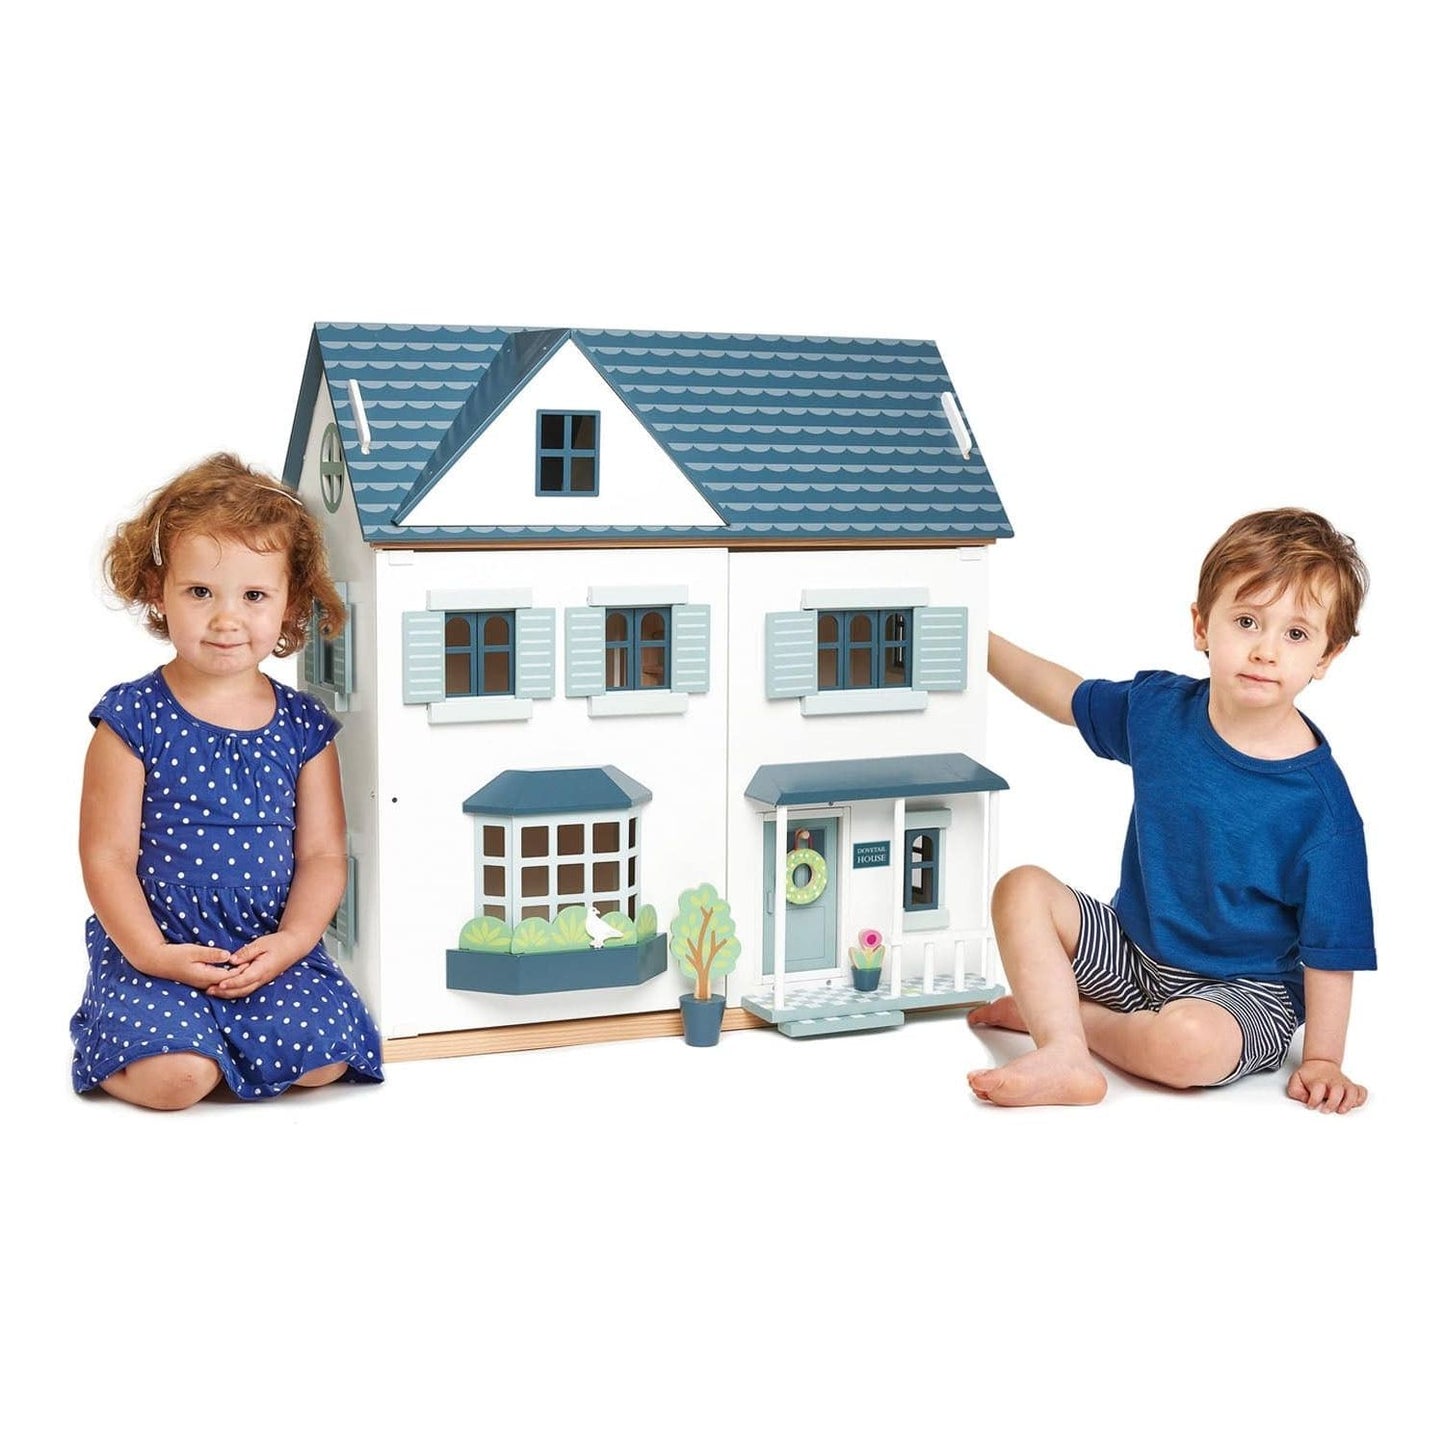 Dovetail House - The Online Toy Shop - Dollhouse - 3